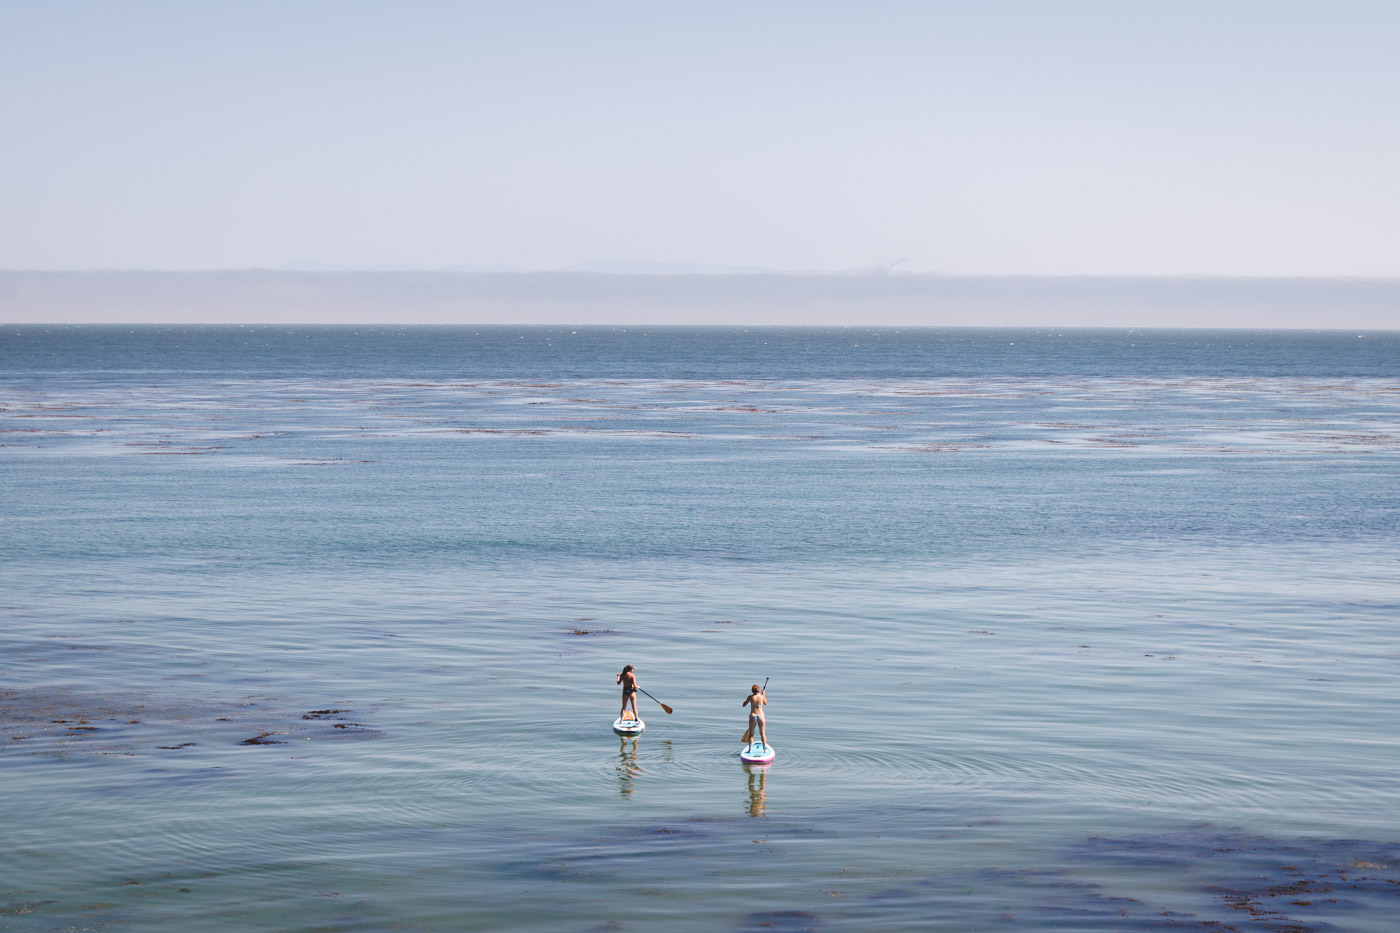 Two girls on stand up paddle boards on the calm ocean waters of Pleasure Point.